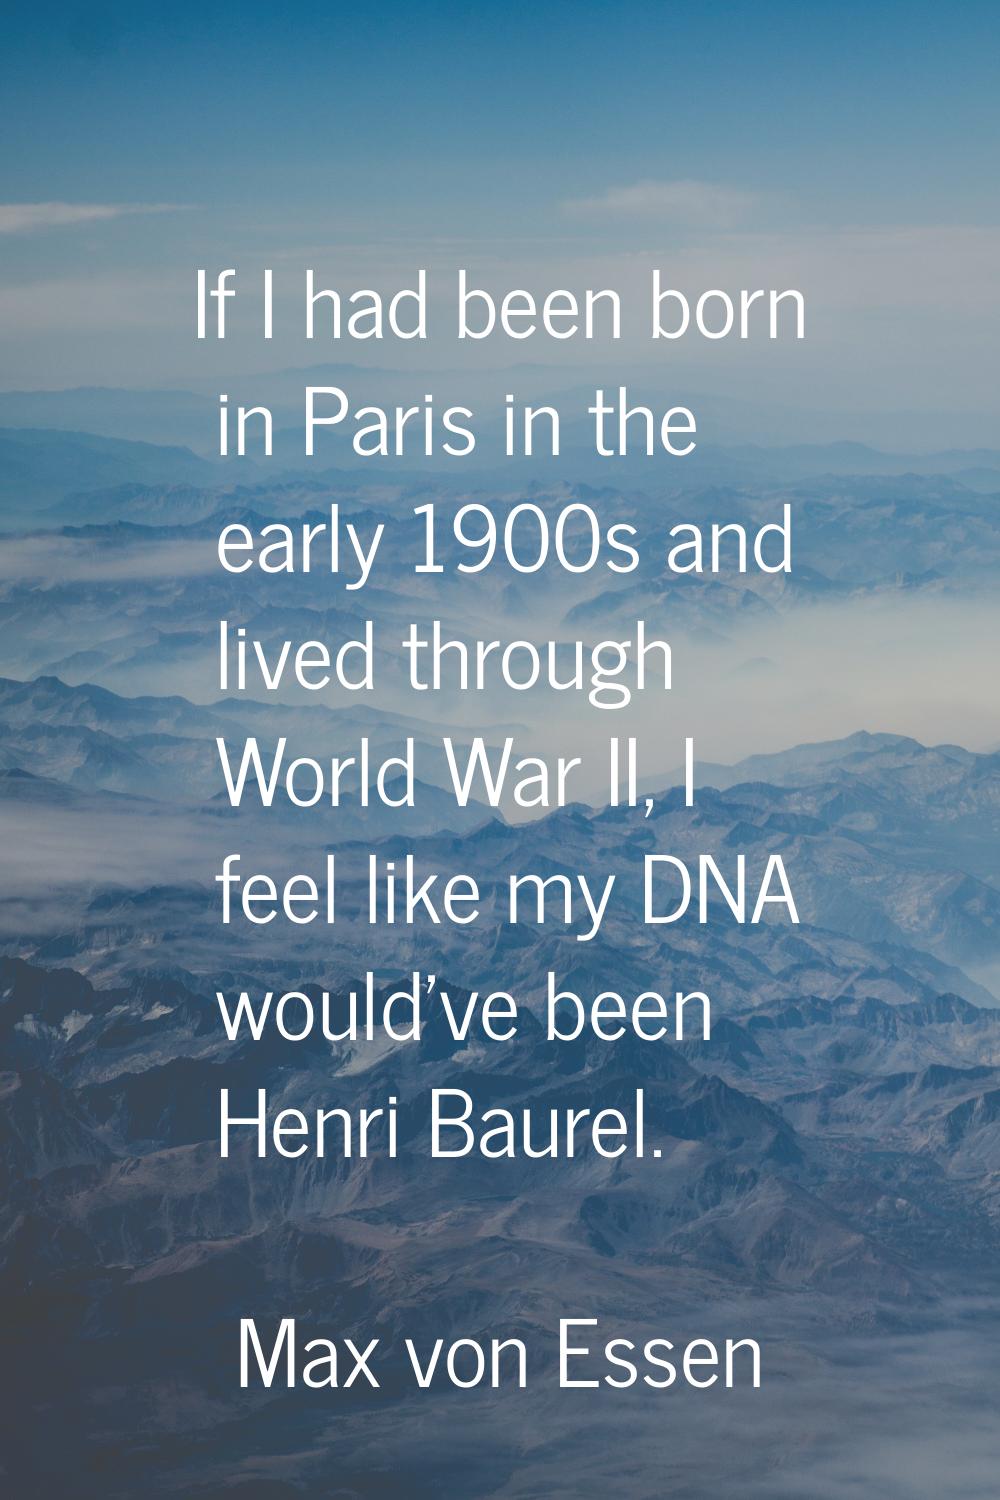 If I had been born in Paris in the early 1900s and lived through World War II, I feel like my DNA w